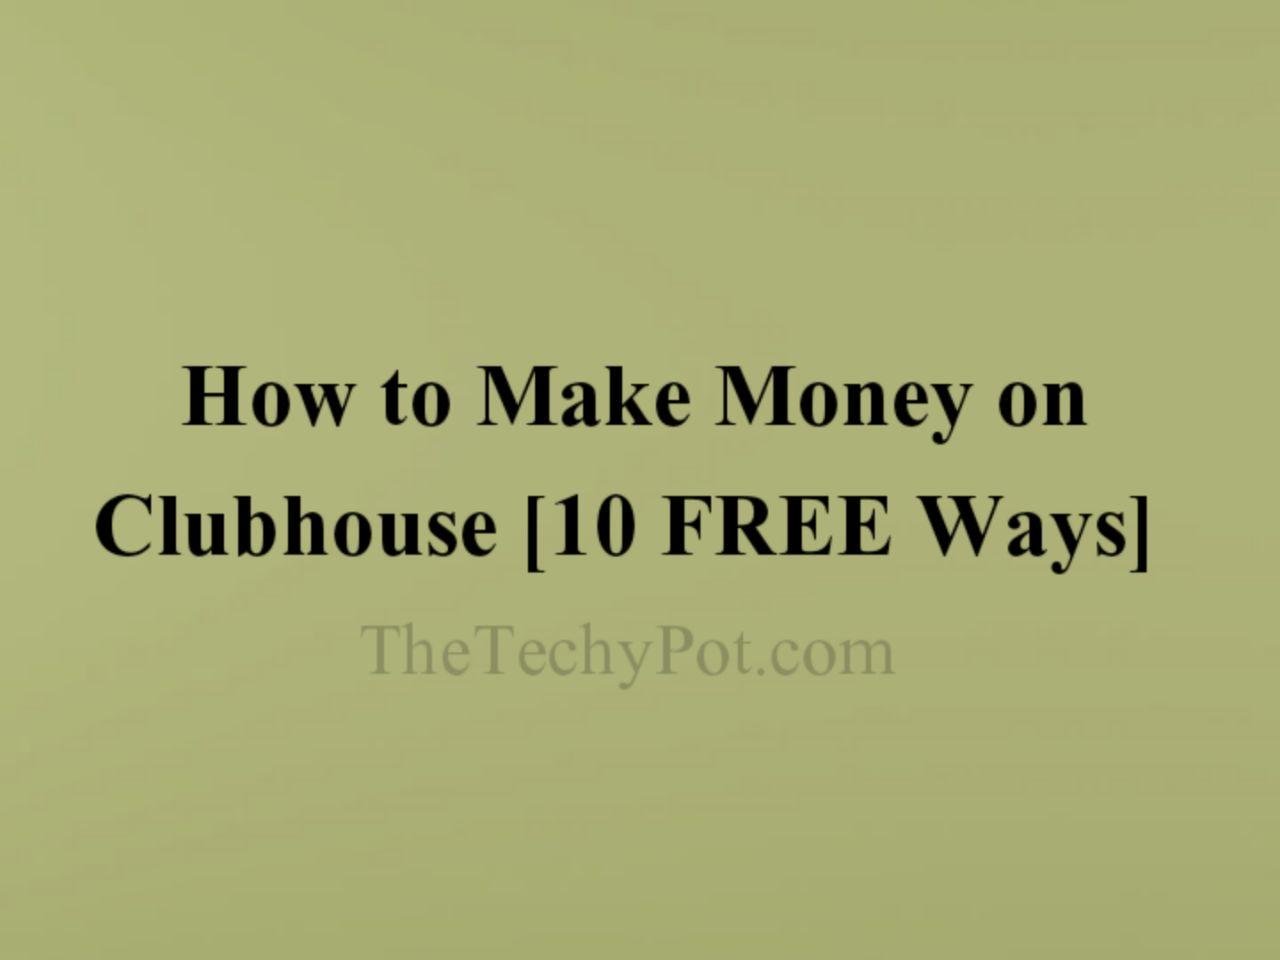 How to Make Money on Clubhouse for FREE